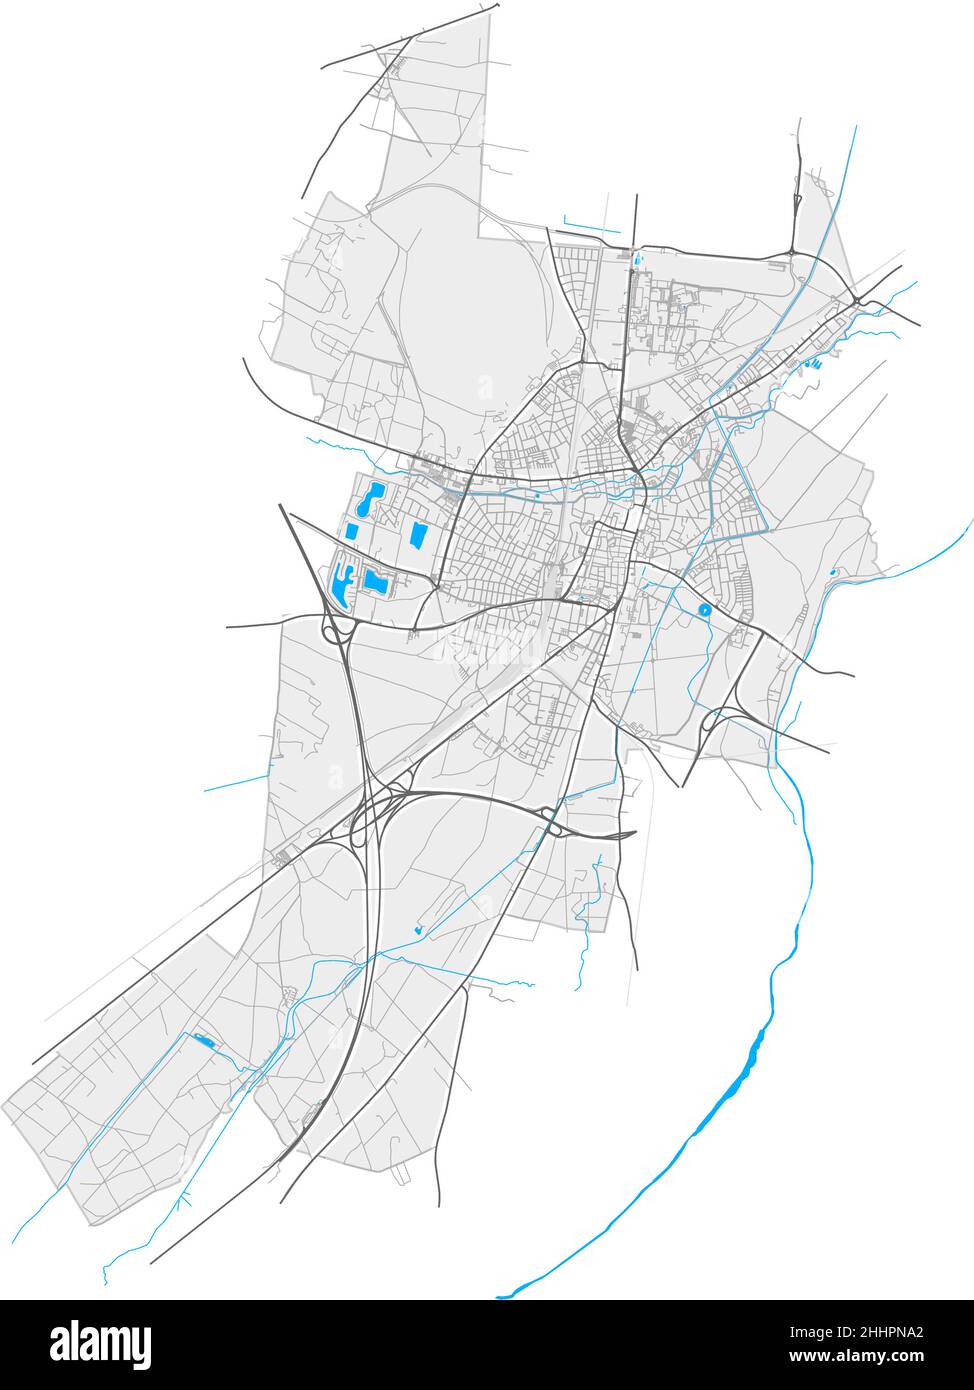 WienerNeustadt, Lower Austria, Austria high resolution vector map with city boundaries and editable paths. White outlines for main roads. Many detaile Stock Vector